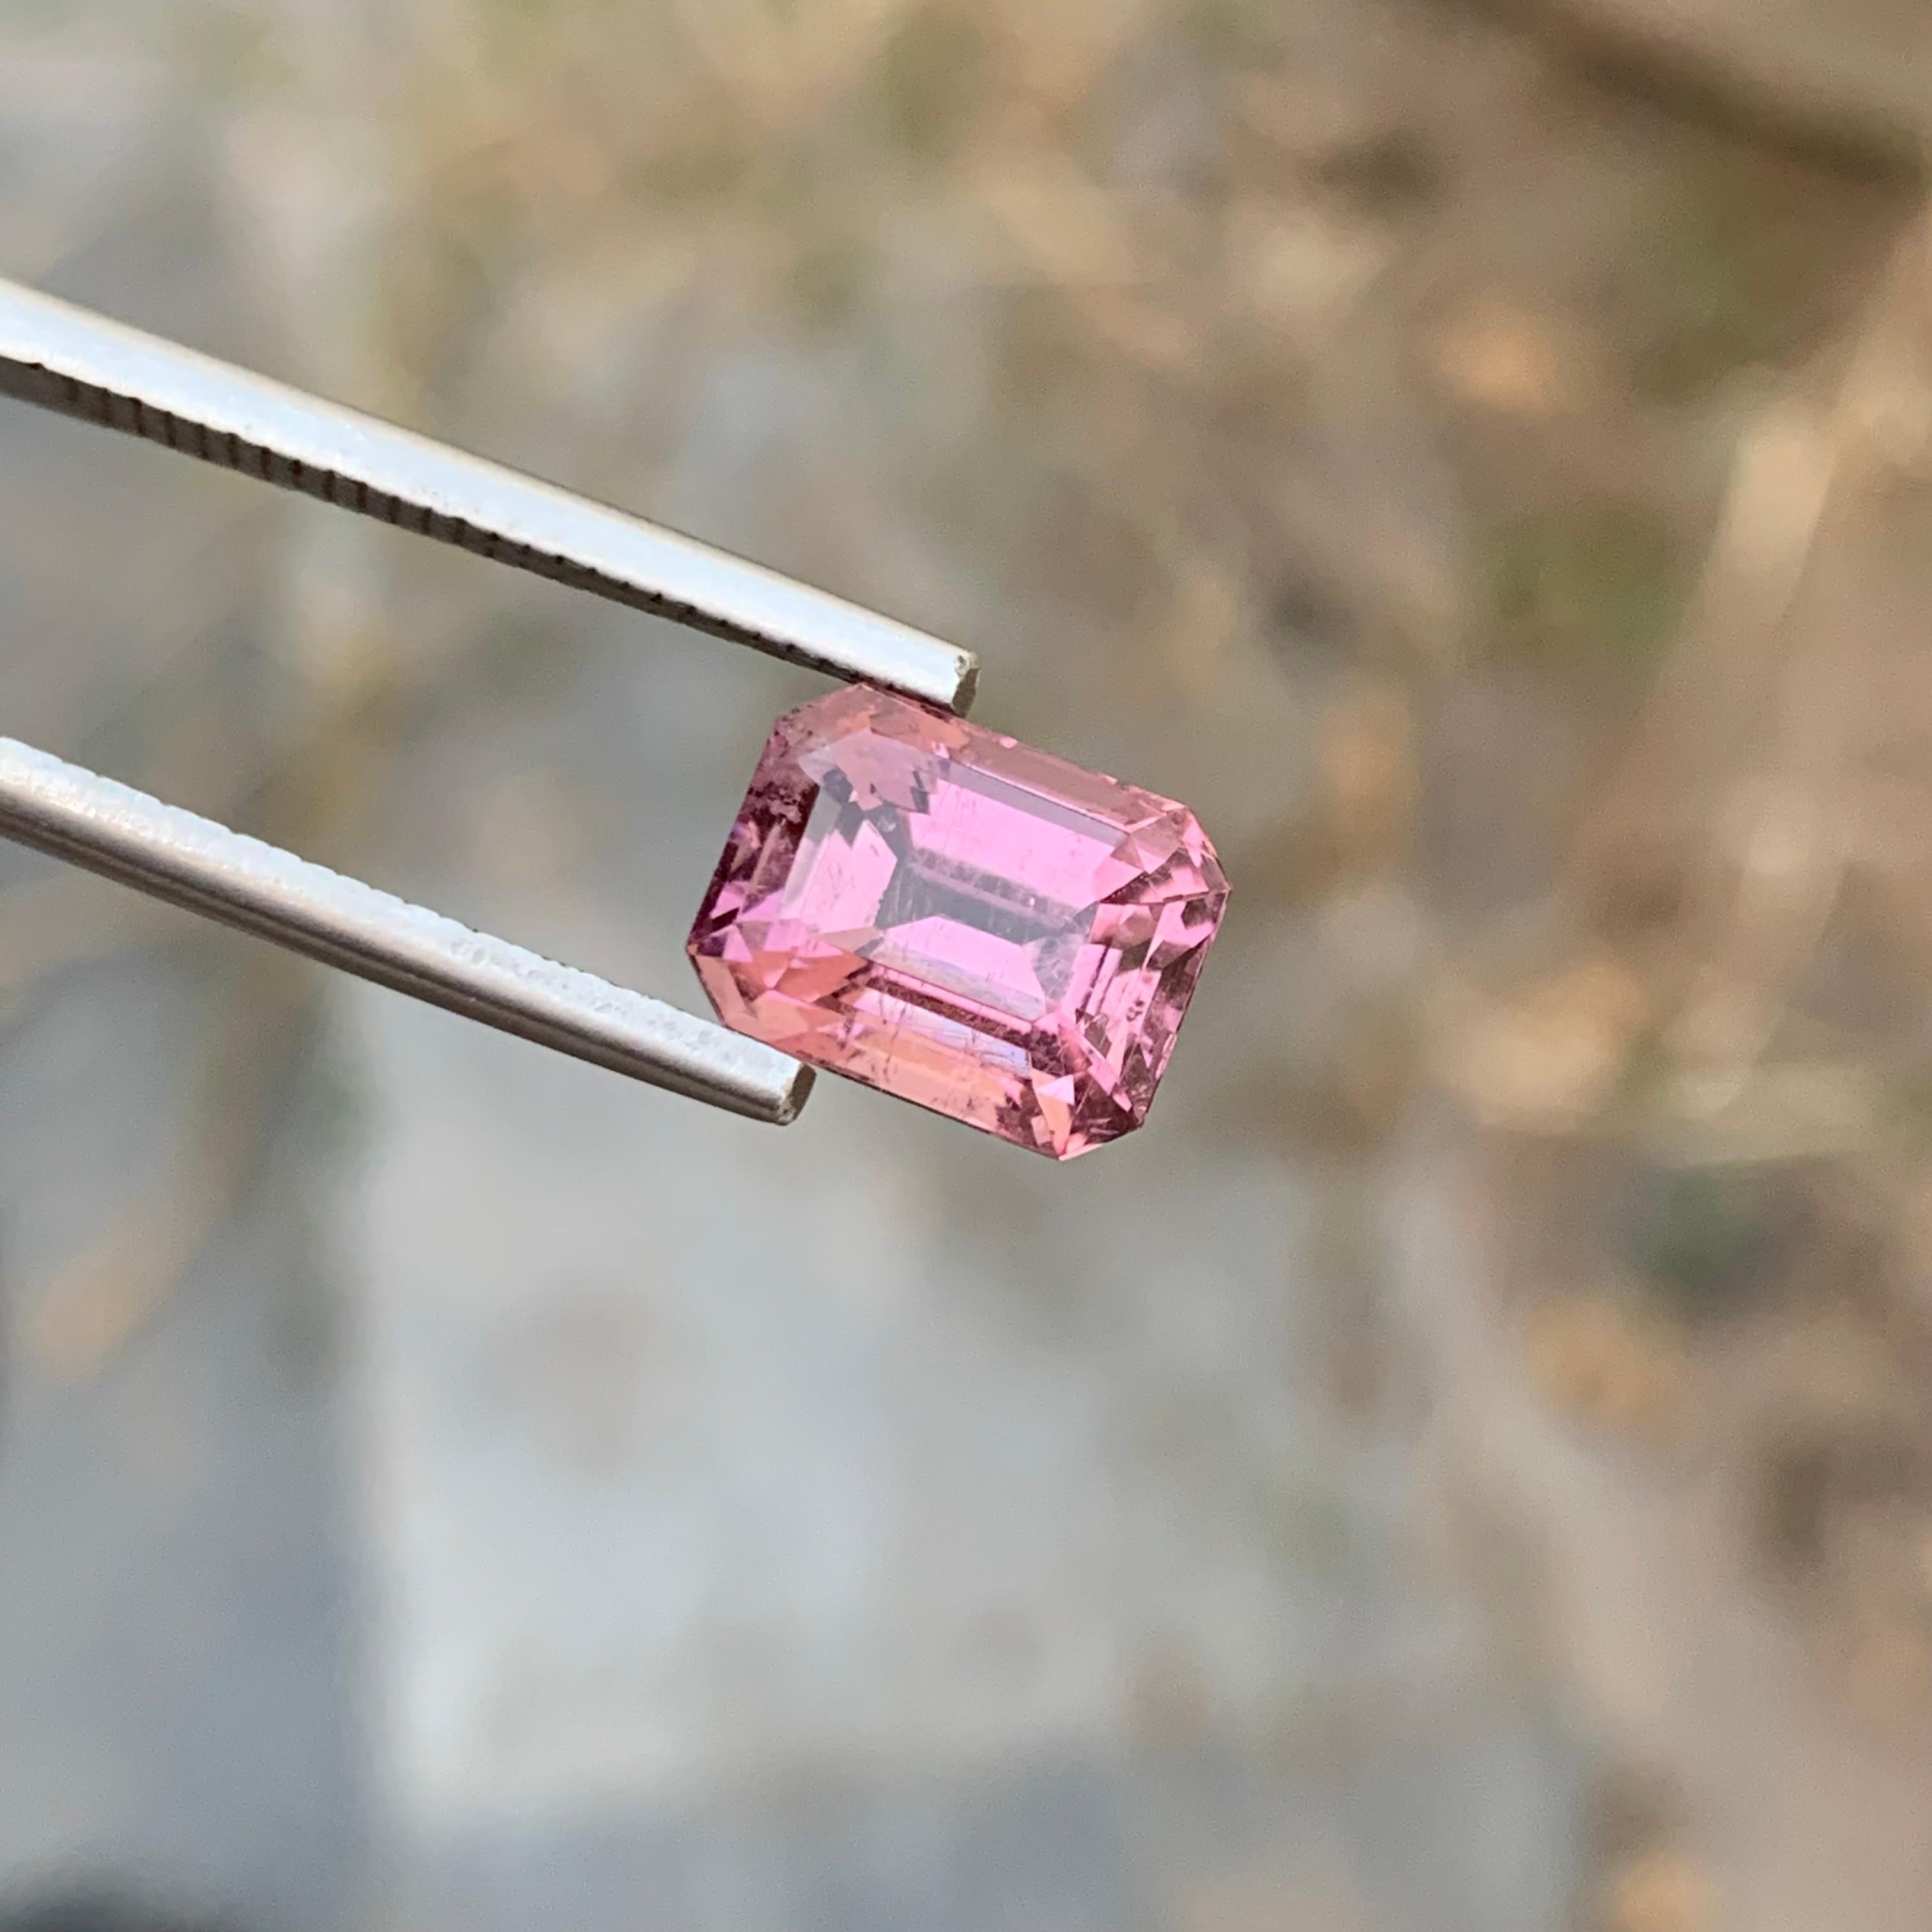 Loose Pink Tourmaline
Weight: 4.05 Carats
Dimension: 9.8 x 7.5 x 6.8 Mm
Colour: Pink 
Origin: Afghanistan
Certificate: On Demand
Treatment: Non

Tourmaline is a captivating gemstone known for its remarkable variety of colors, making it a favorite